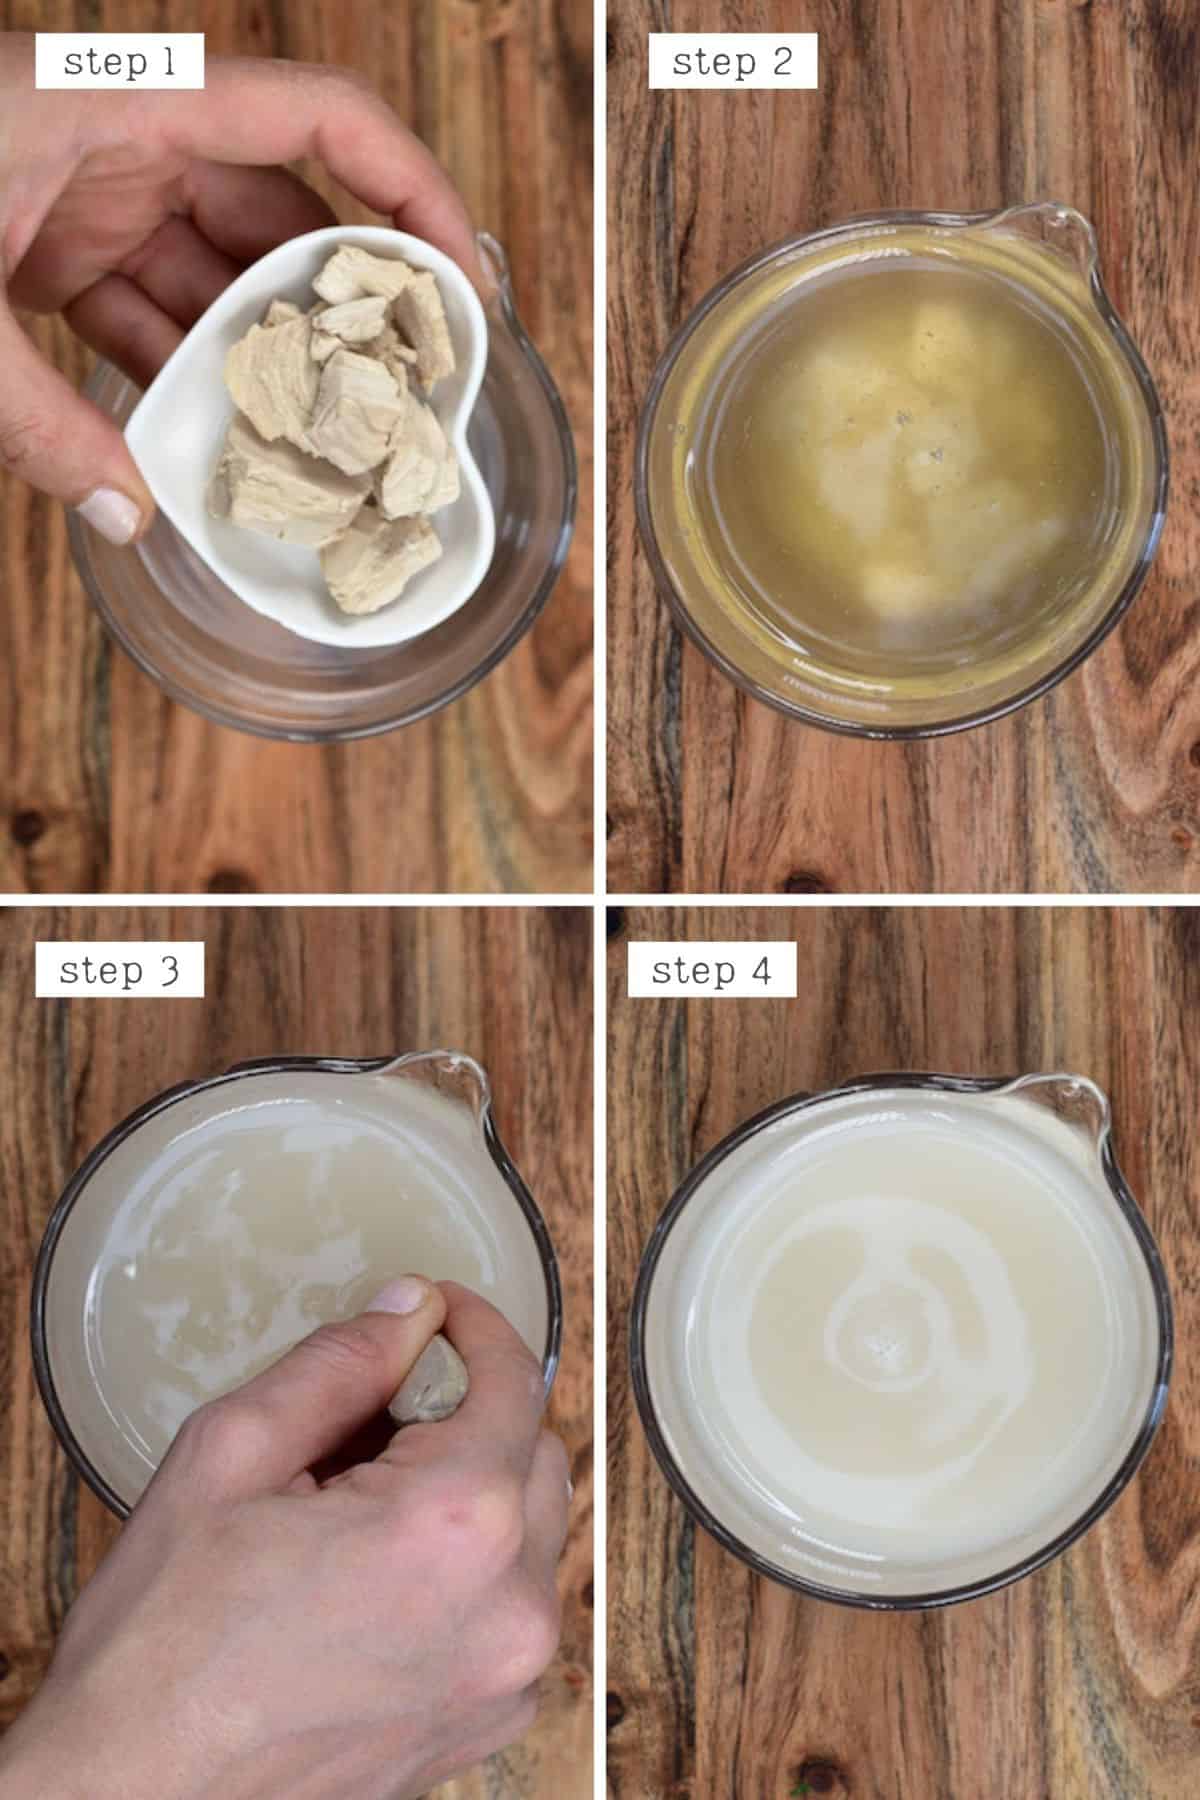 Steps for mixing yeast for bagels